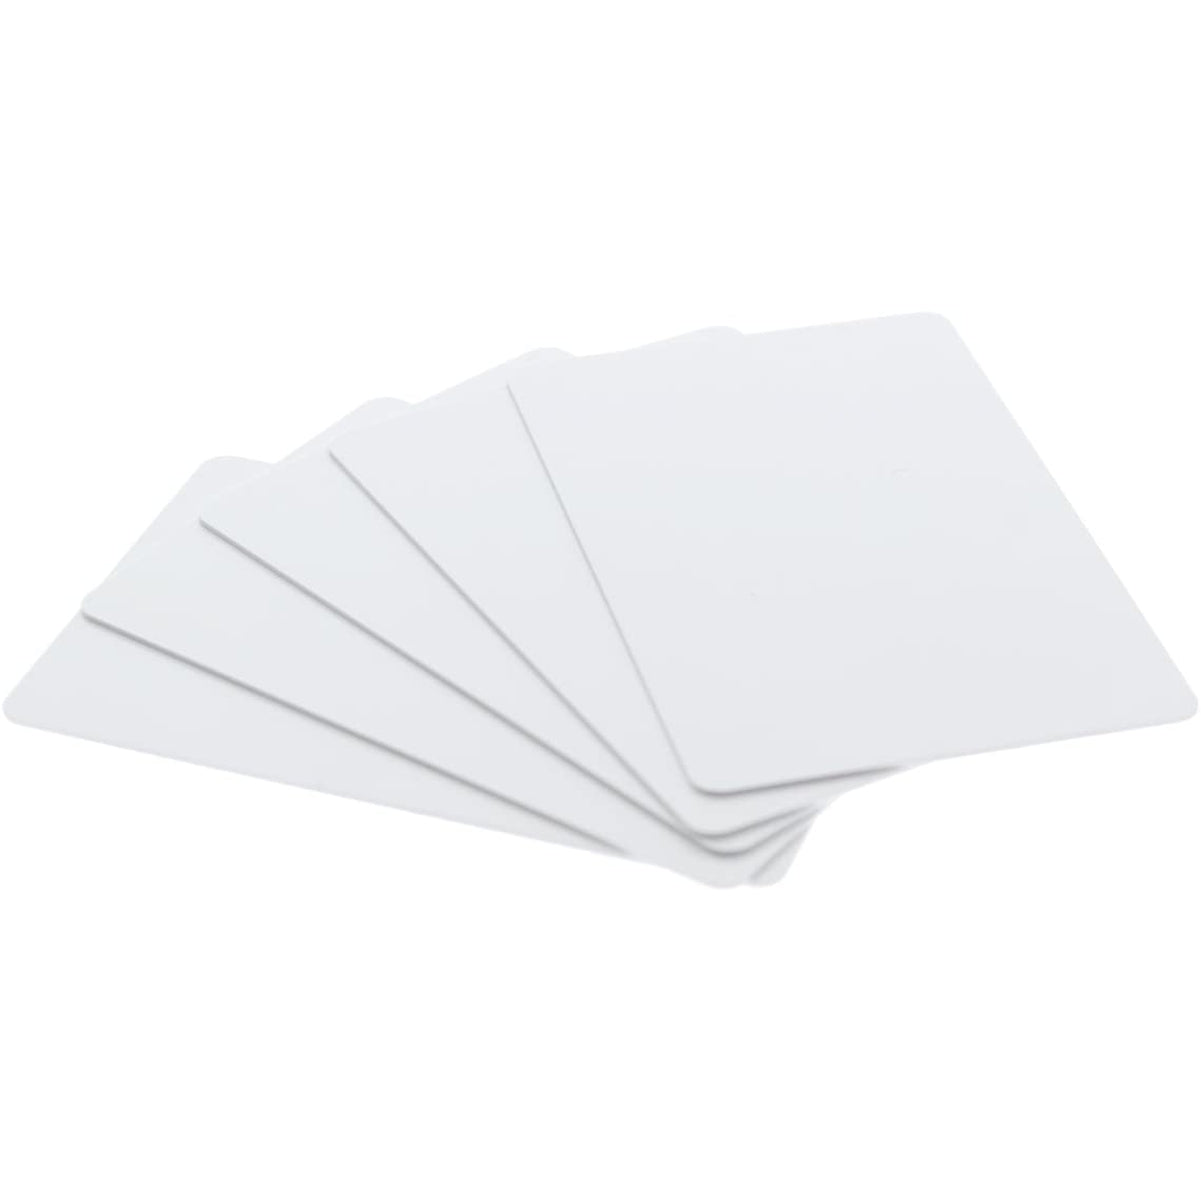 White PVC Cards, color cards, and more CR80 PVC Cards.